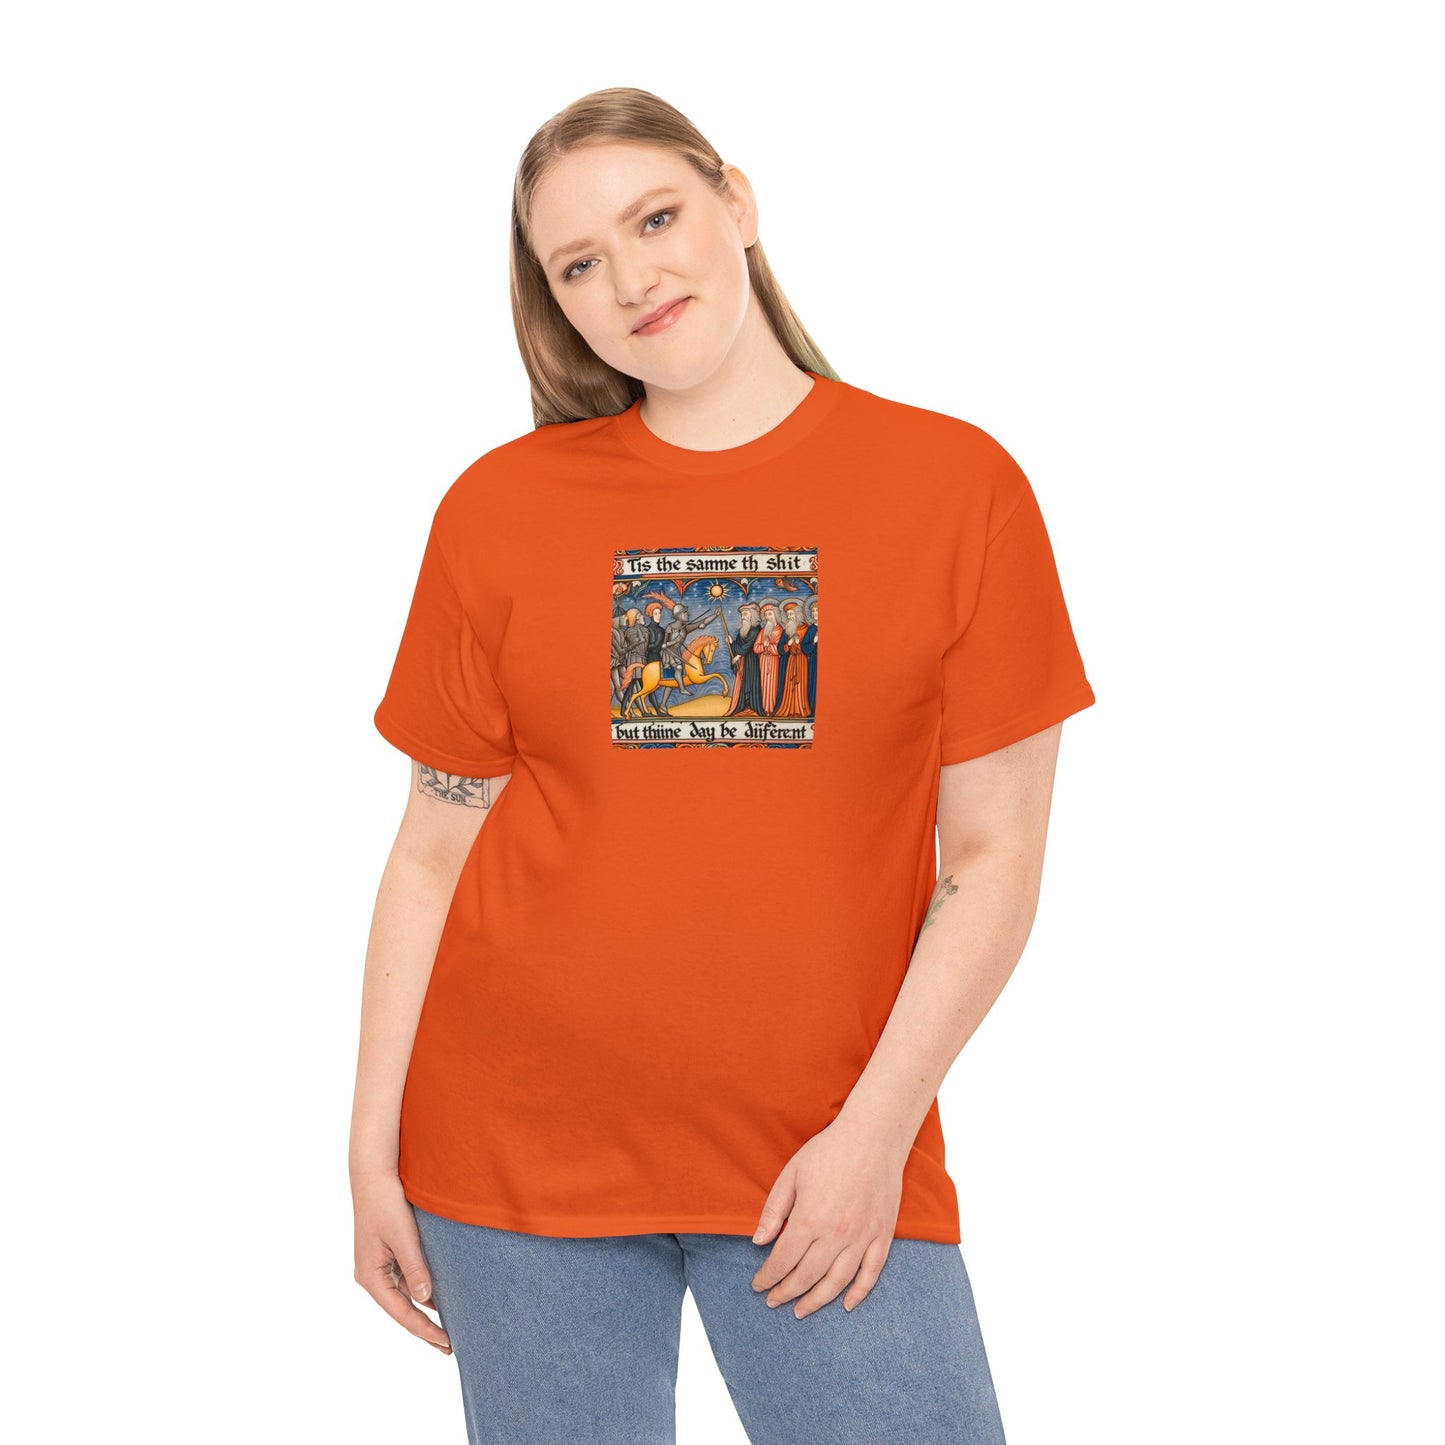 'Tis the Sameth Shit but Thine Day be Differ’nt' Funny  Medieval Design T-Shirt